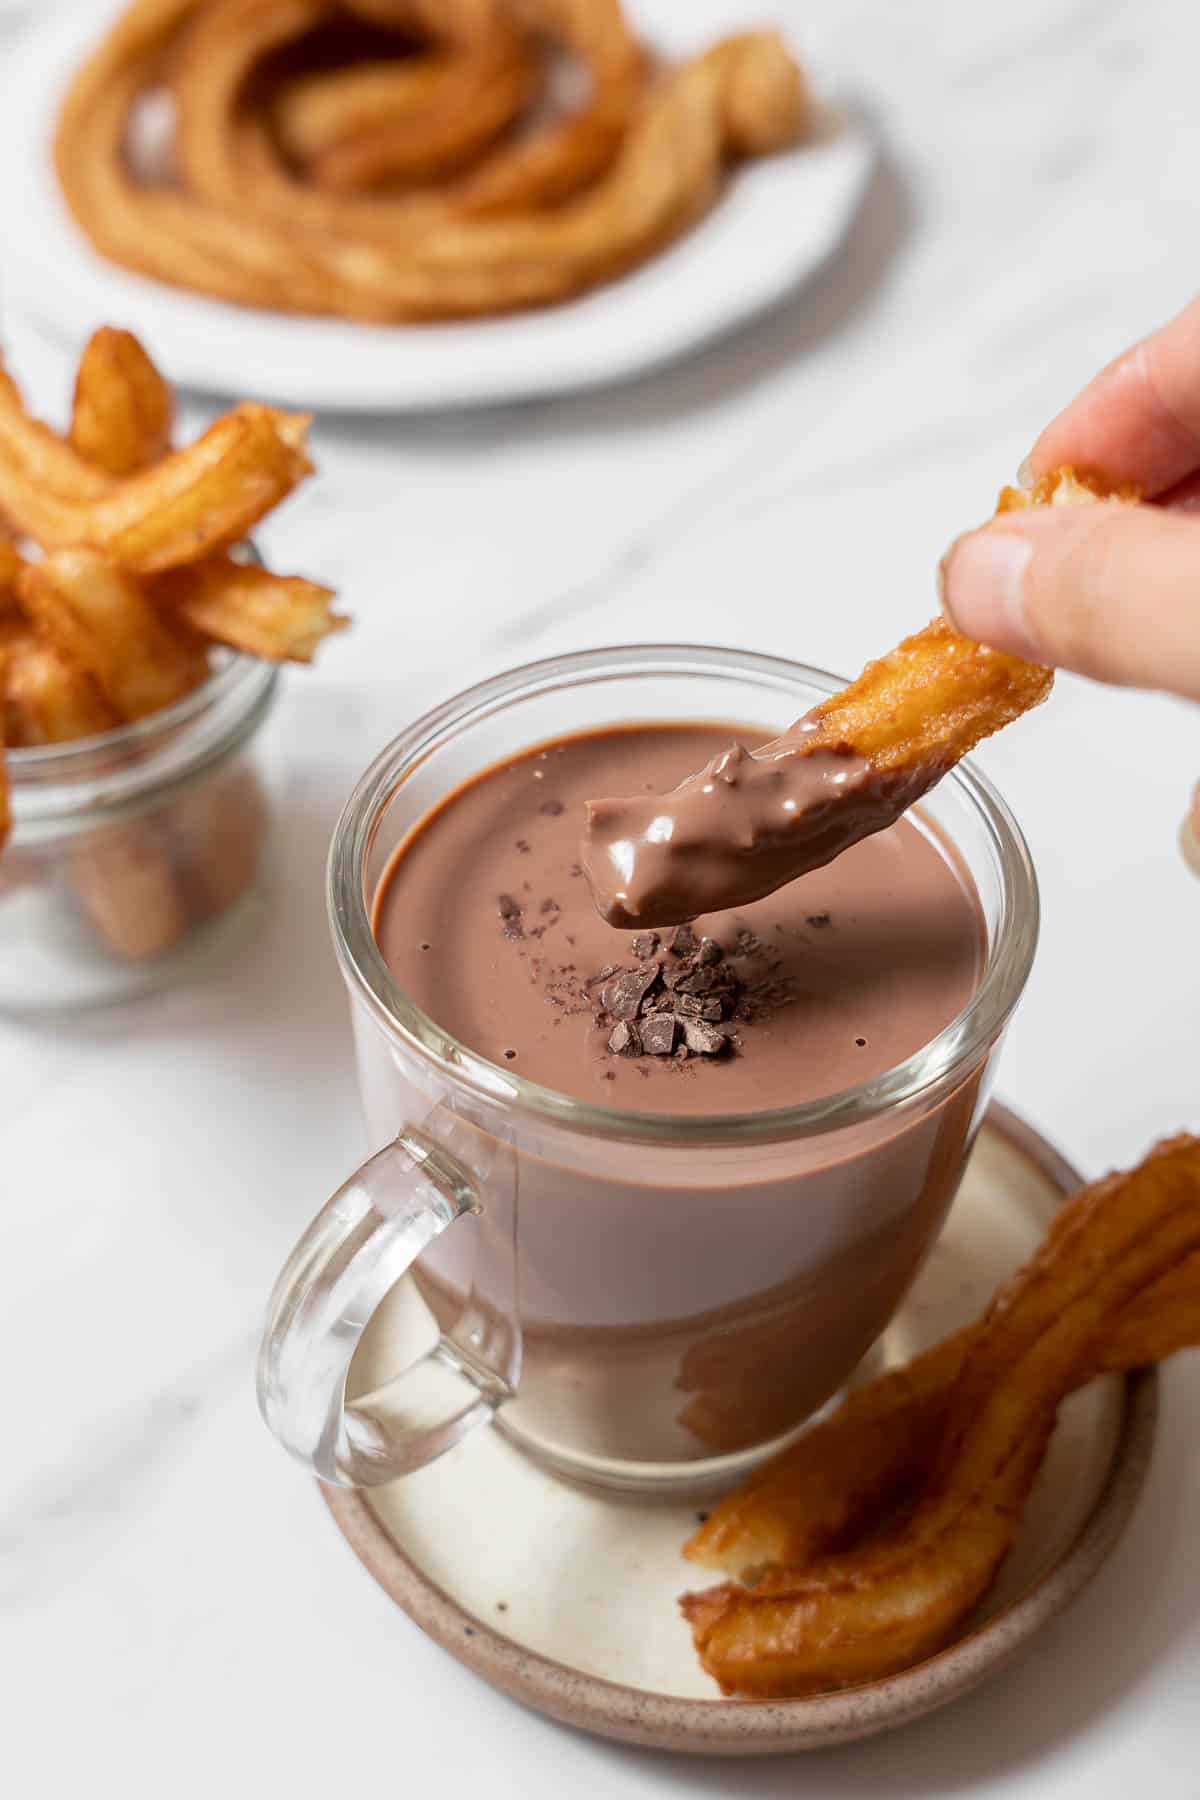 dipping a churro into chocolate.